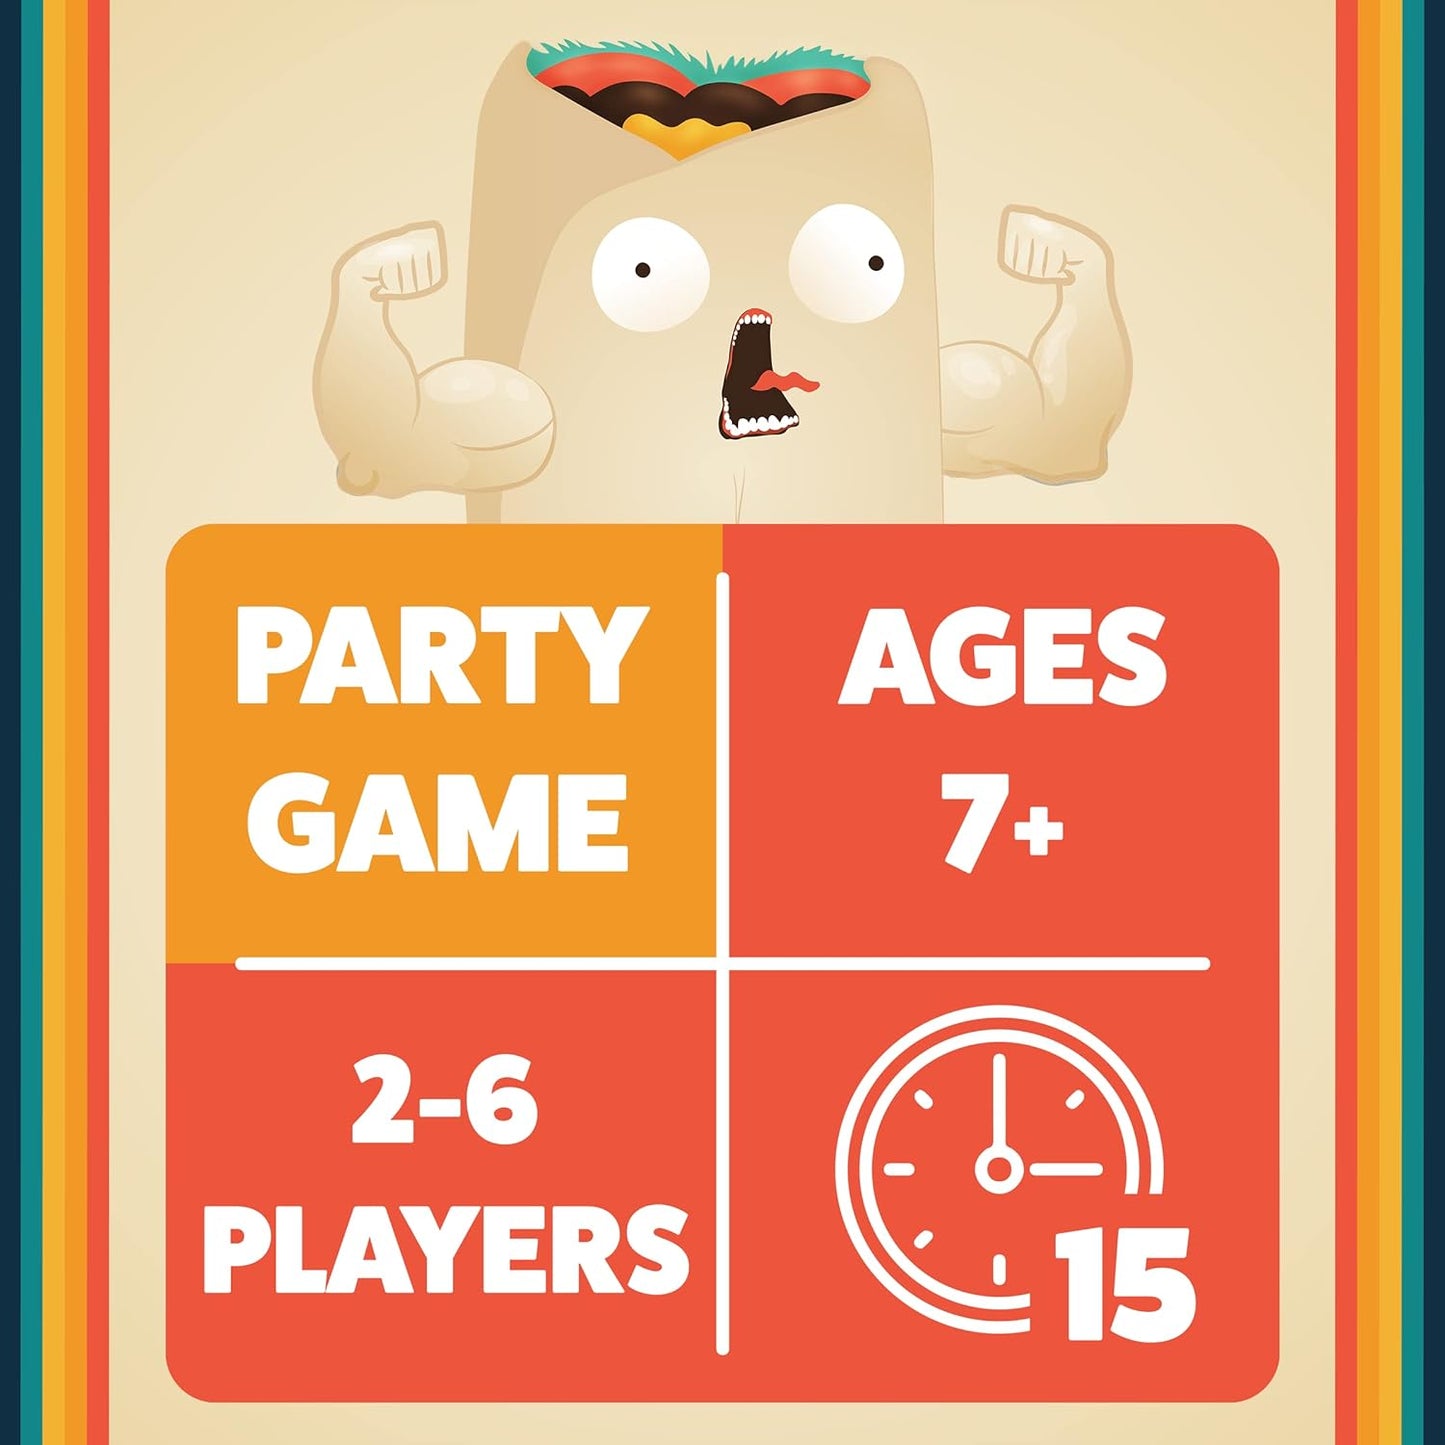 Throw Throw Burrito by Exploding Kittens - A Dodgeball Card Game - Family-Friendly Party Games - for Adults, Teens & Kids - 2-6 Players